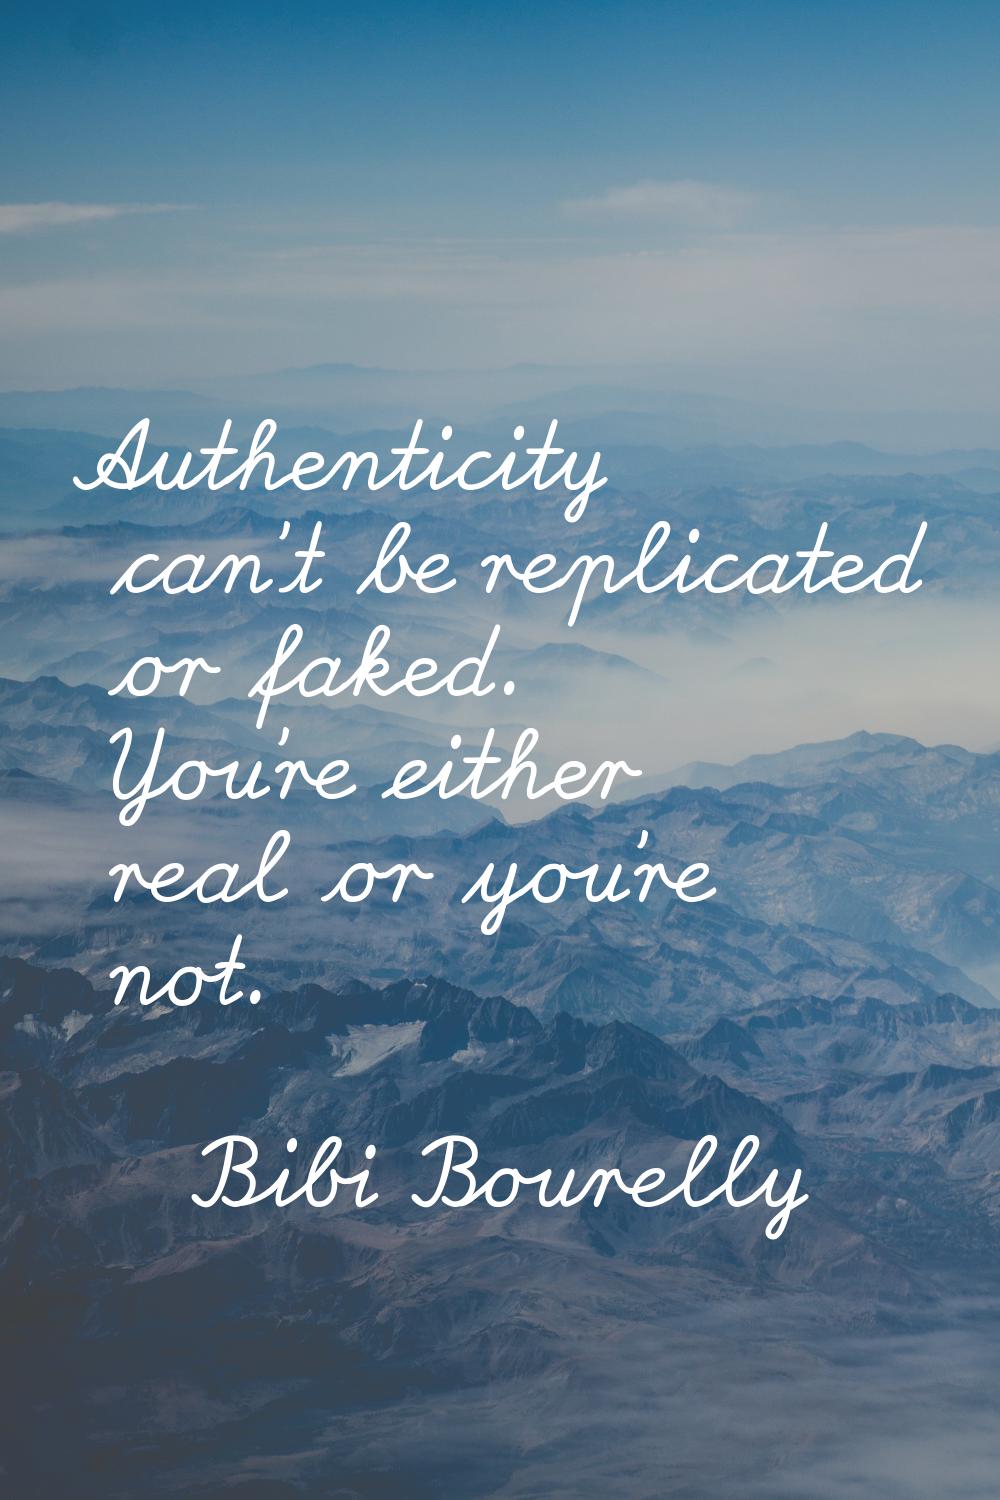 Authenticity can't be replicated or faked. You're either real or you're not.